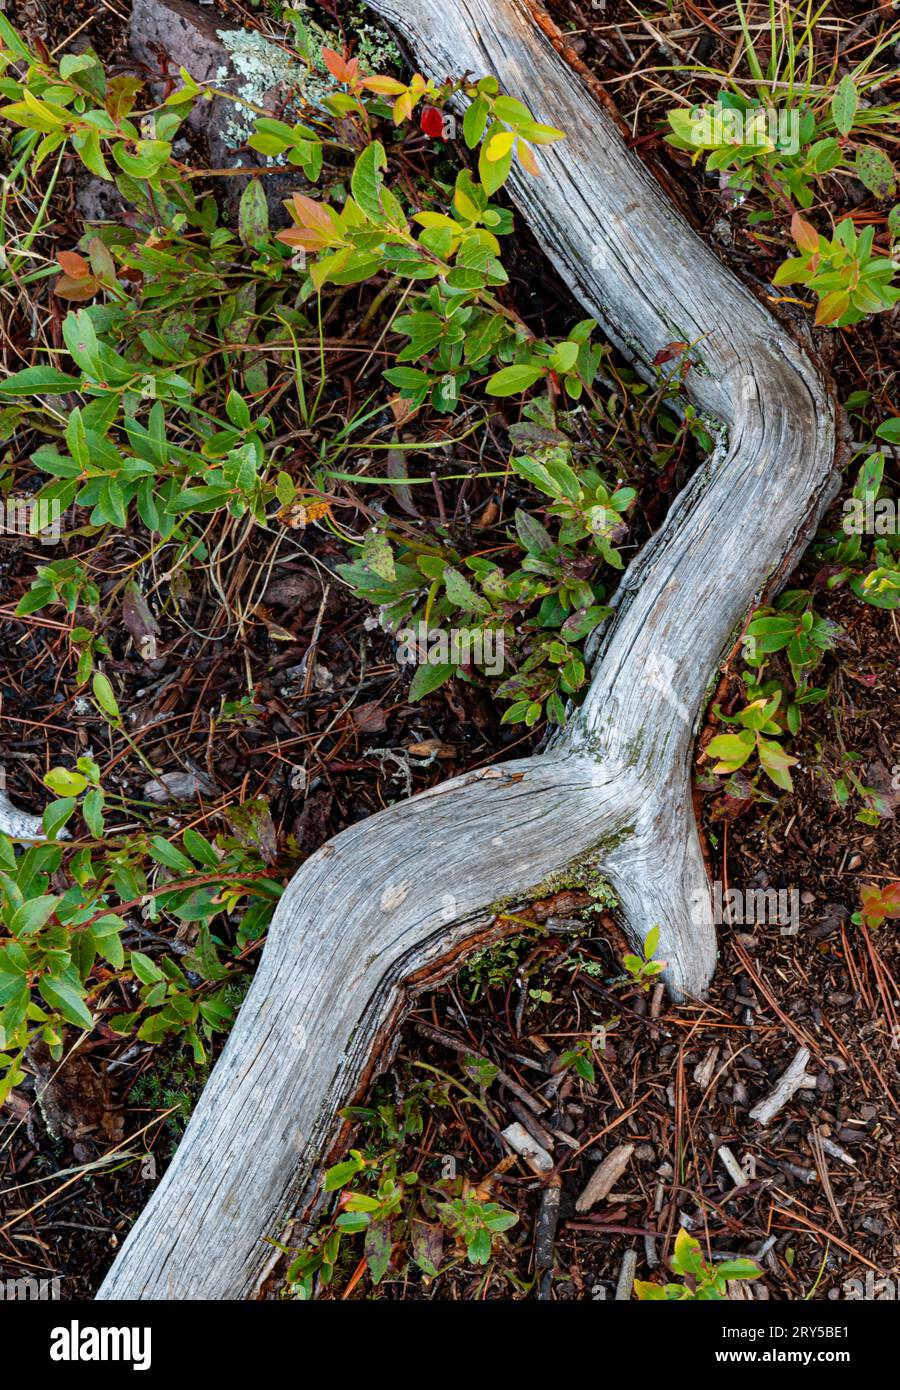 Low bush Blueberry (Vaccinium angustifolium) surrounds a small branch on the forest floor, Shovel Point, Tettegouche State Park, Cook County, Minnesot Stock Photo